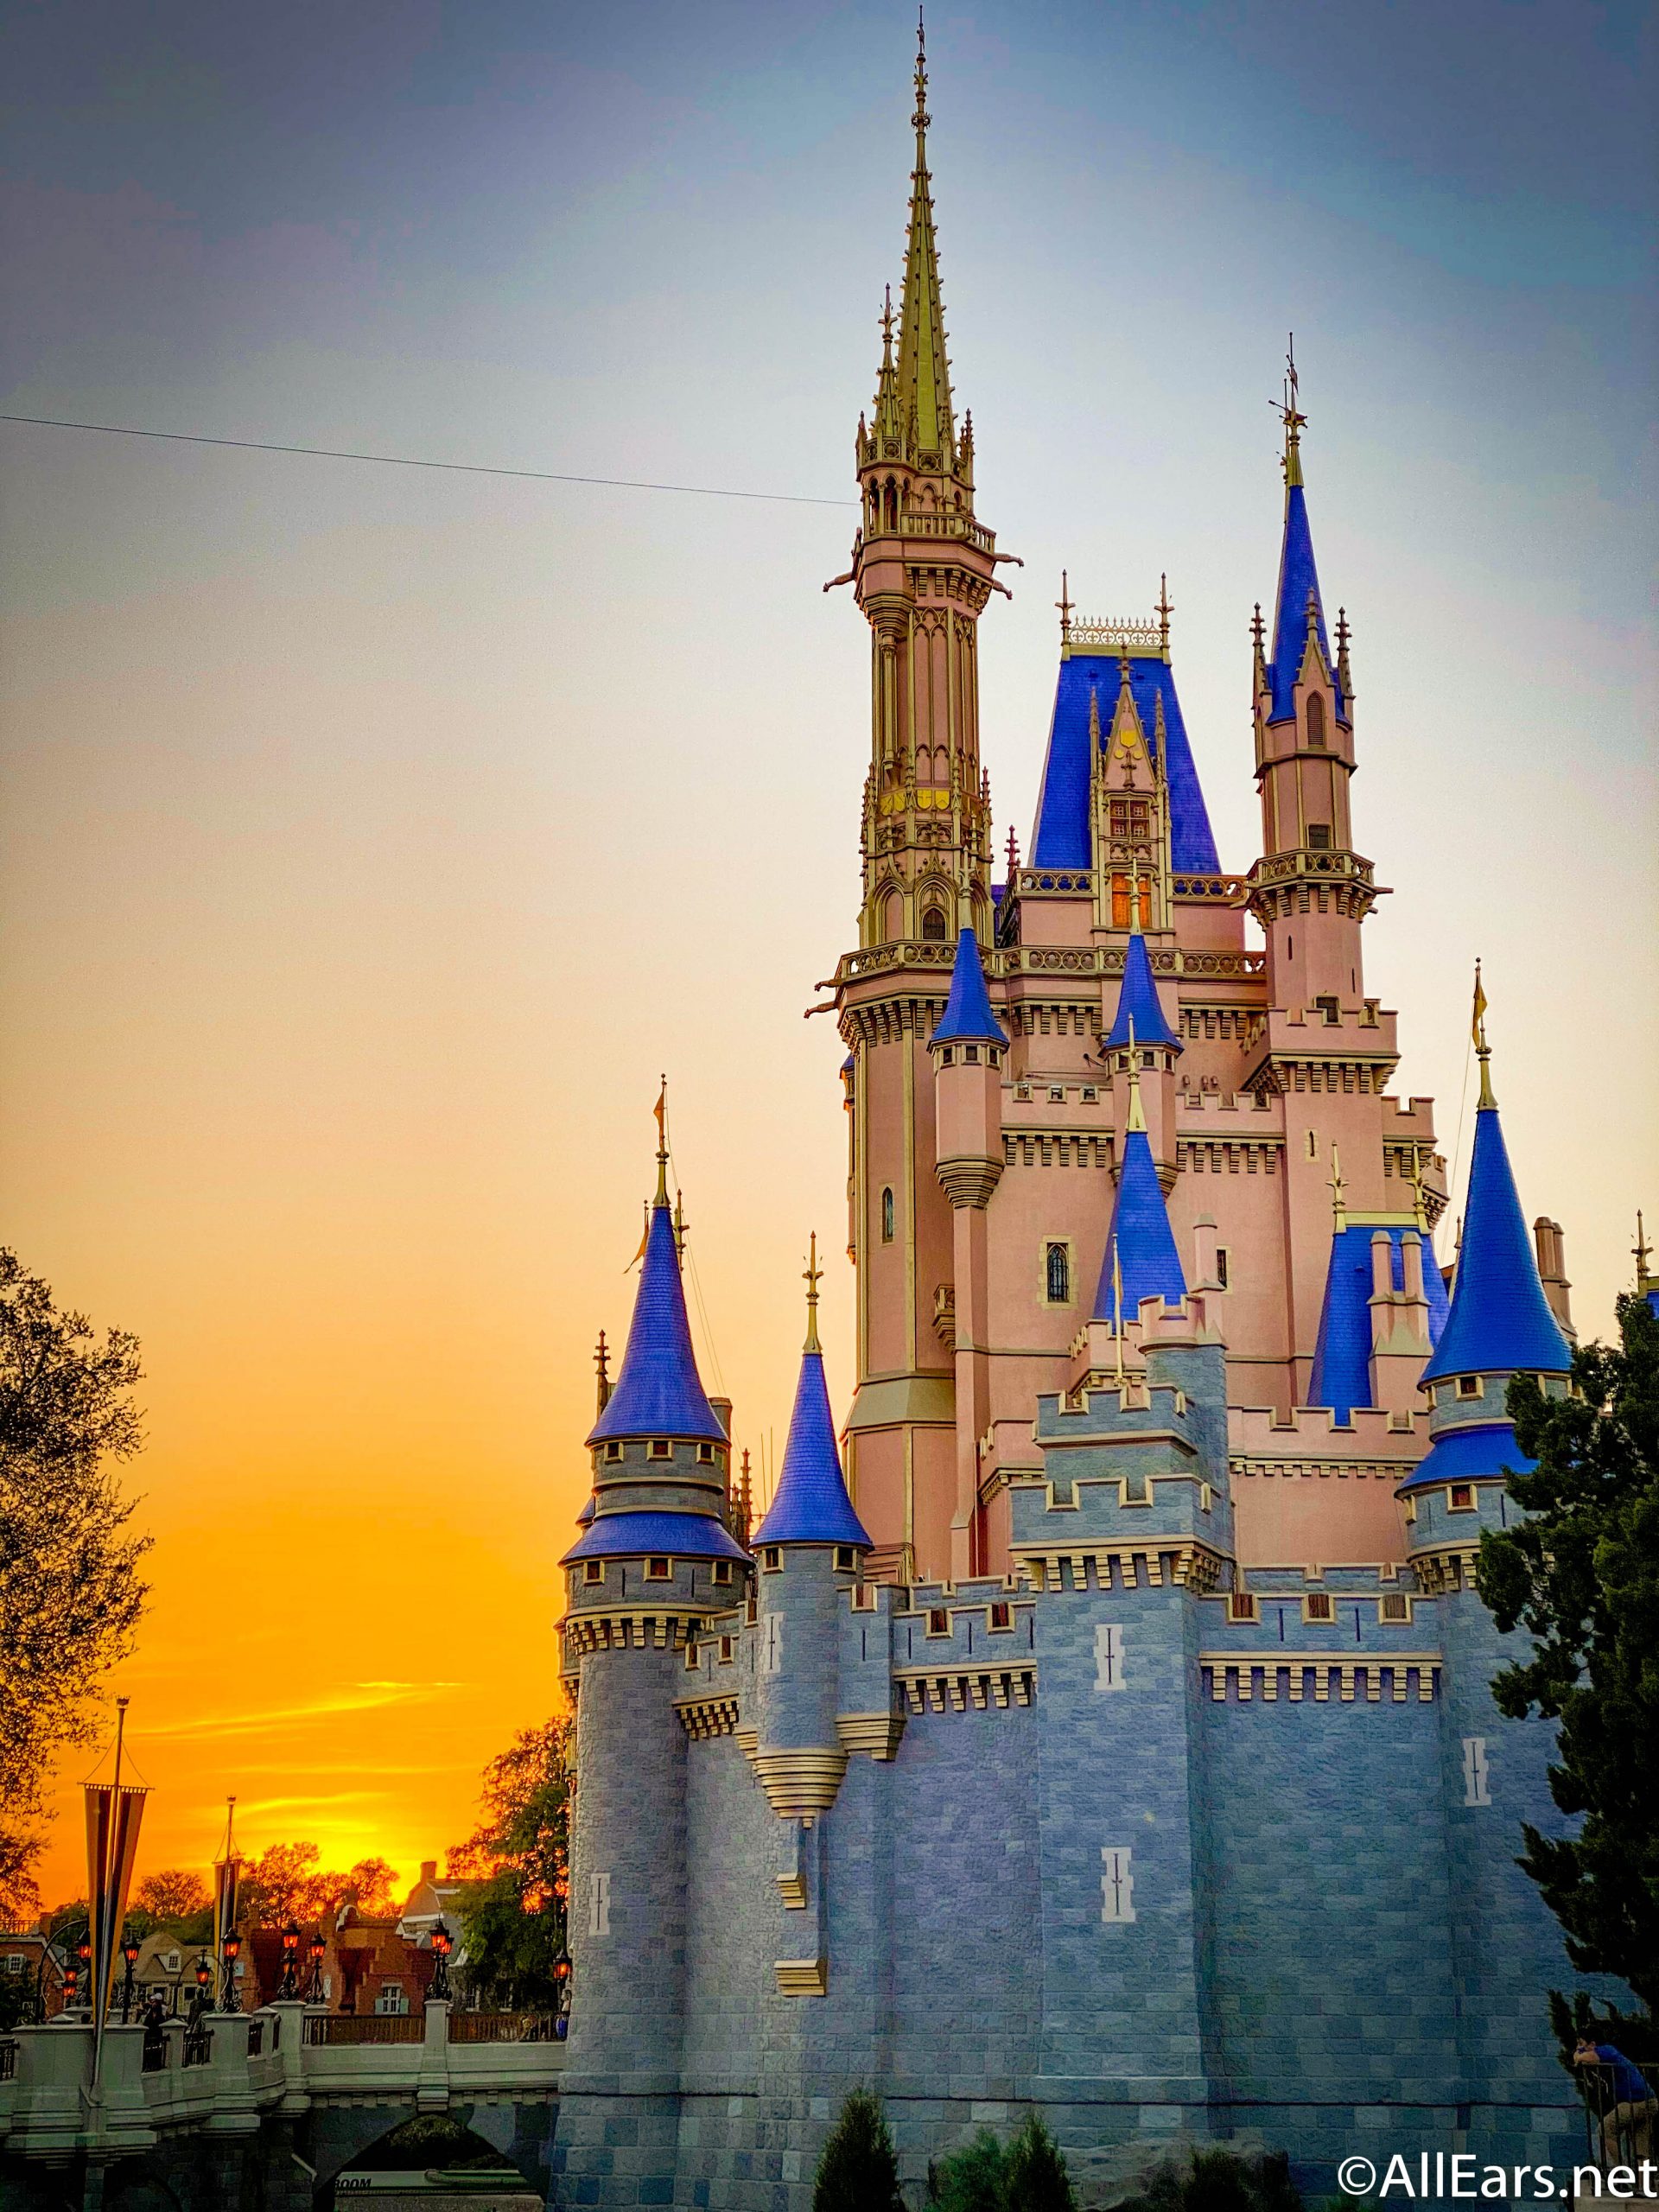 Stunning Disney World Wallpaper to Bring the Magic to Your Phone